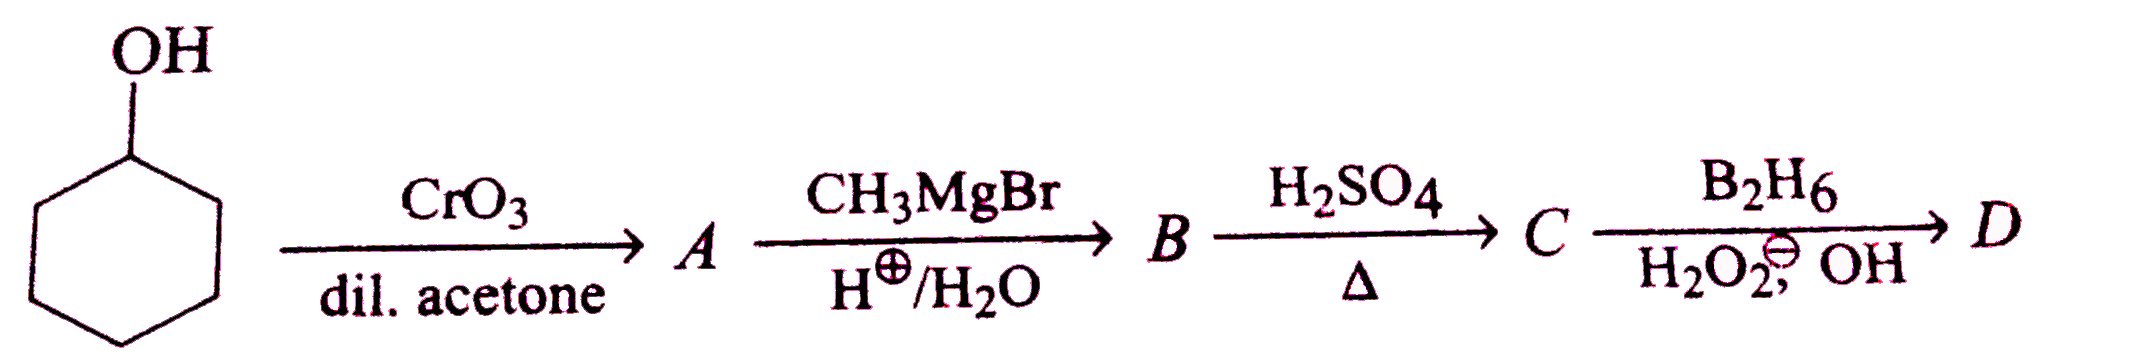 Find the final product A ,B ,C,D of the reaction and choose correct option